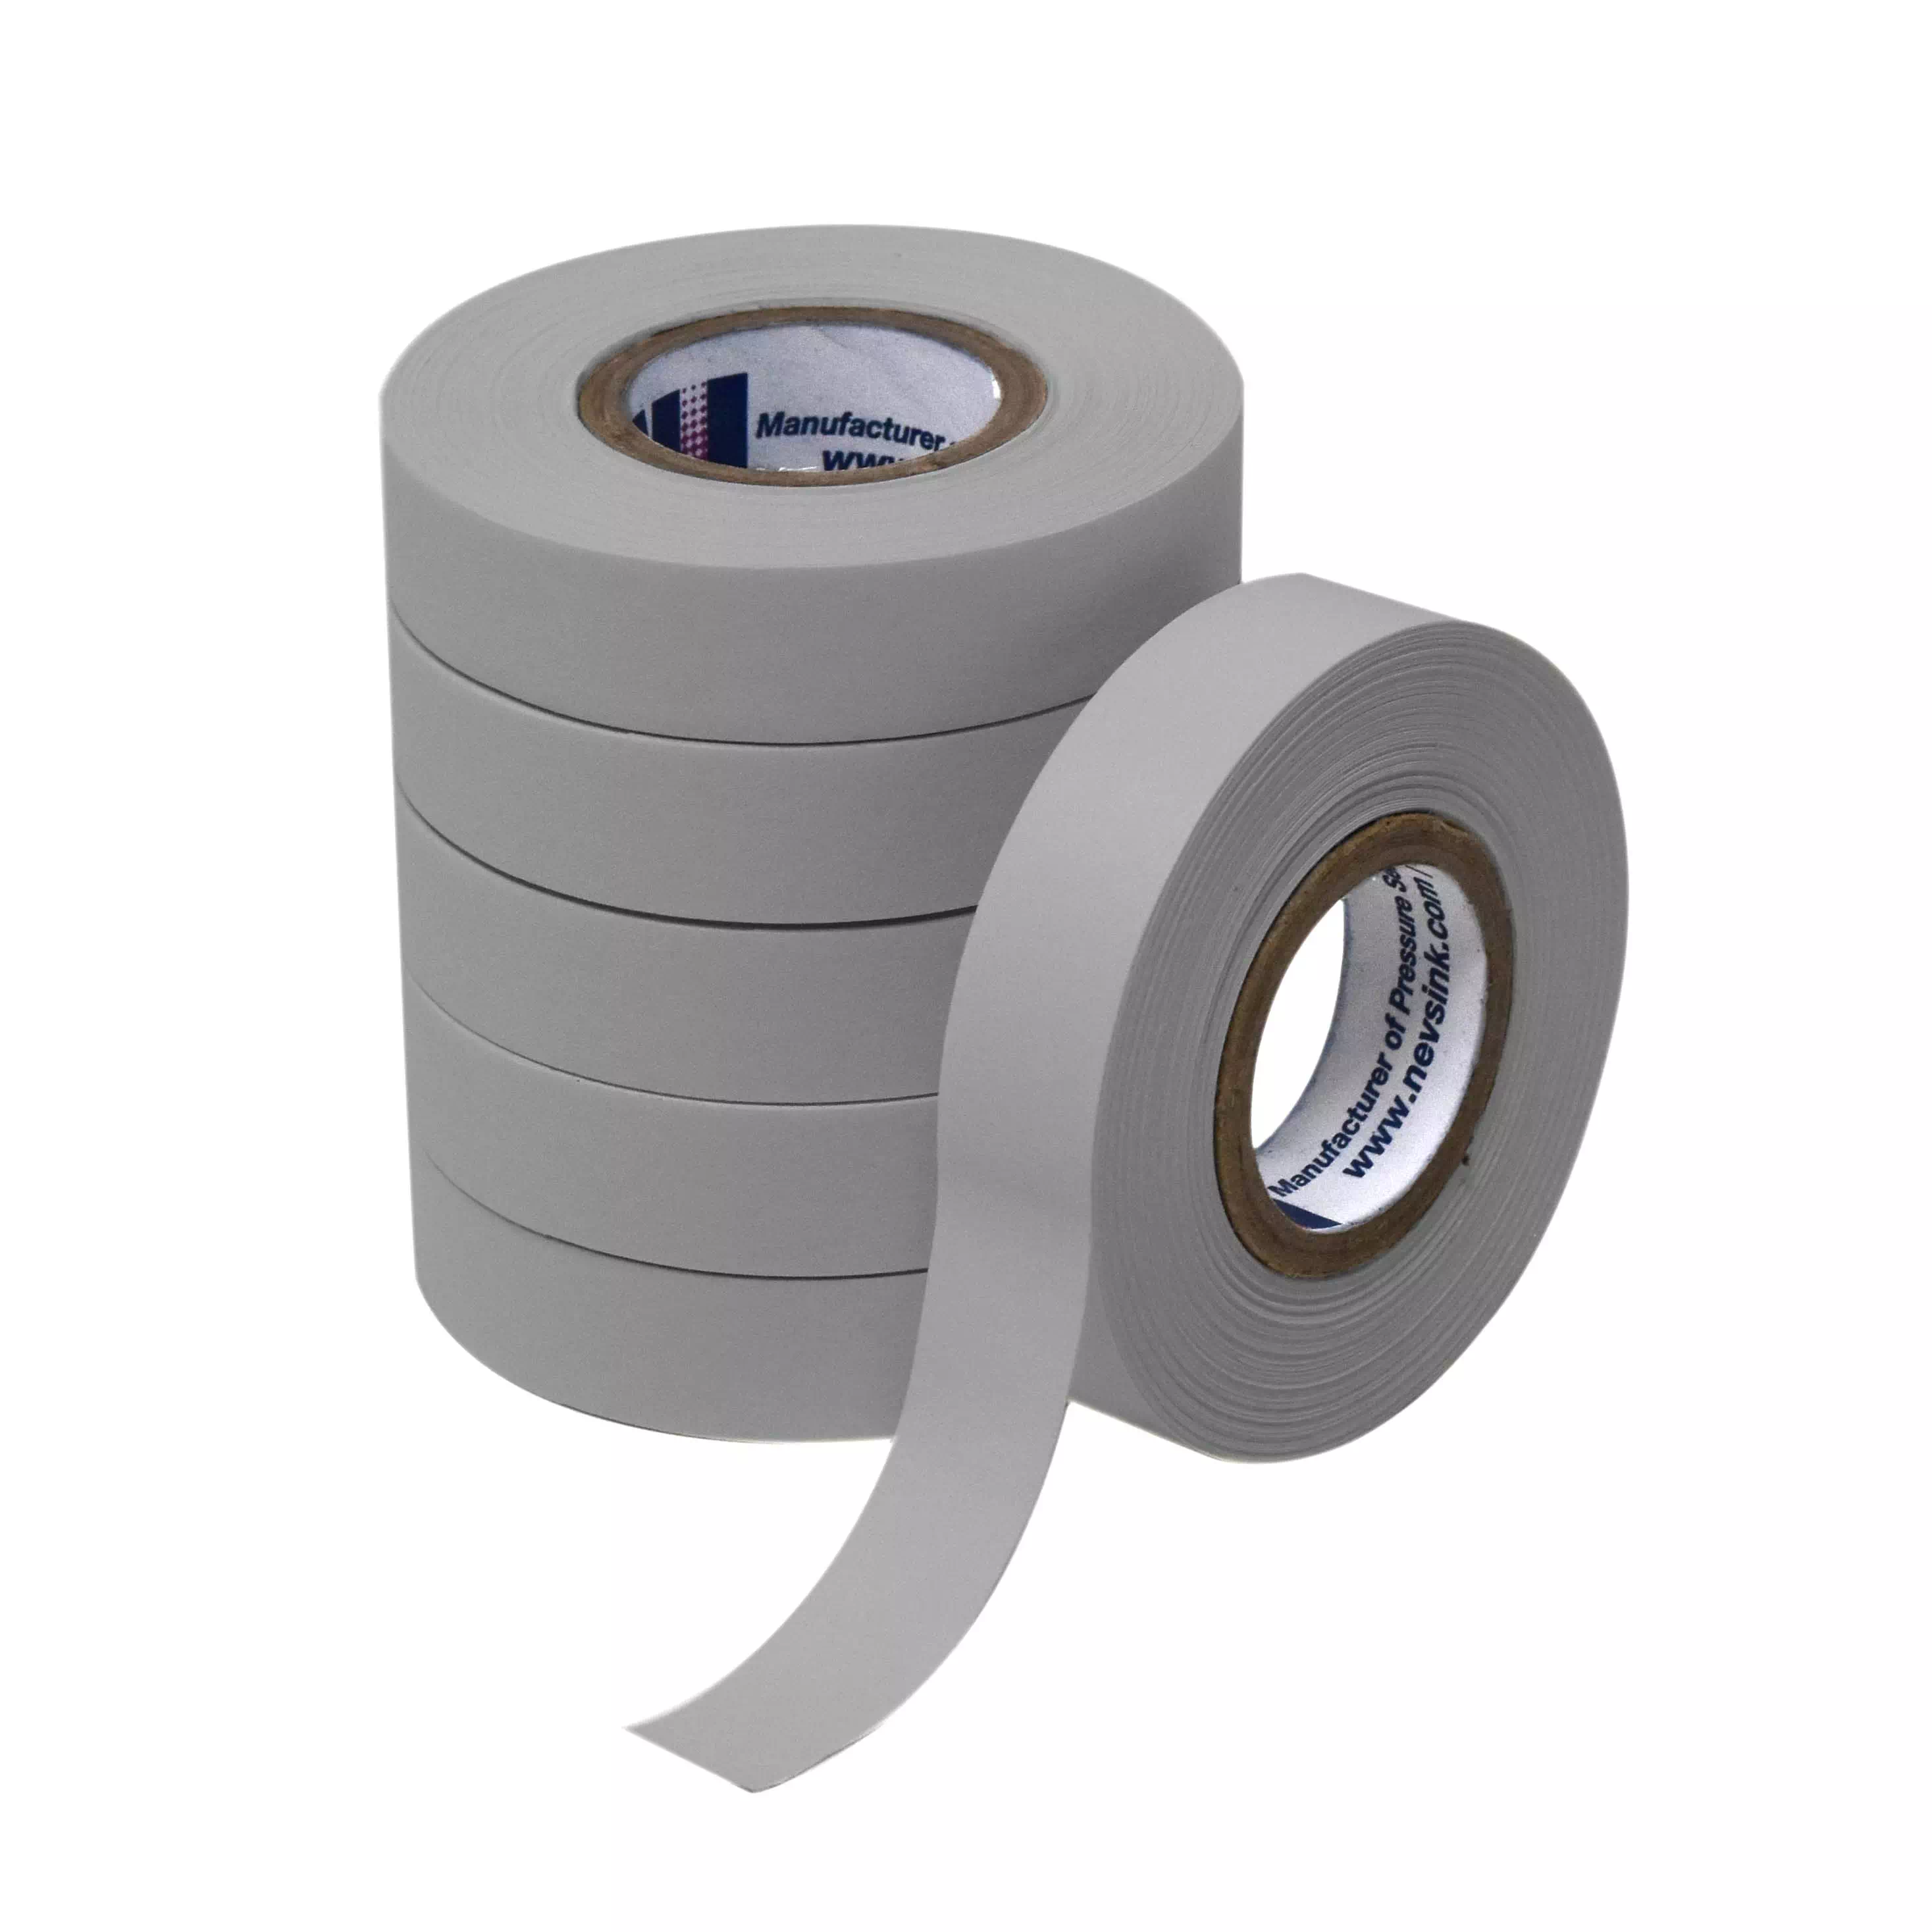 1/2" wide x 500" Gray Labeling Tape